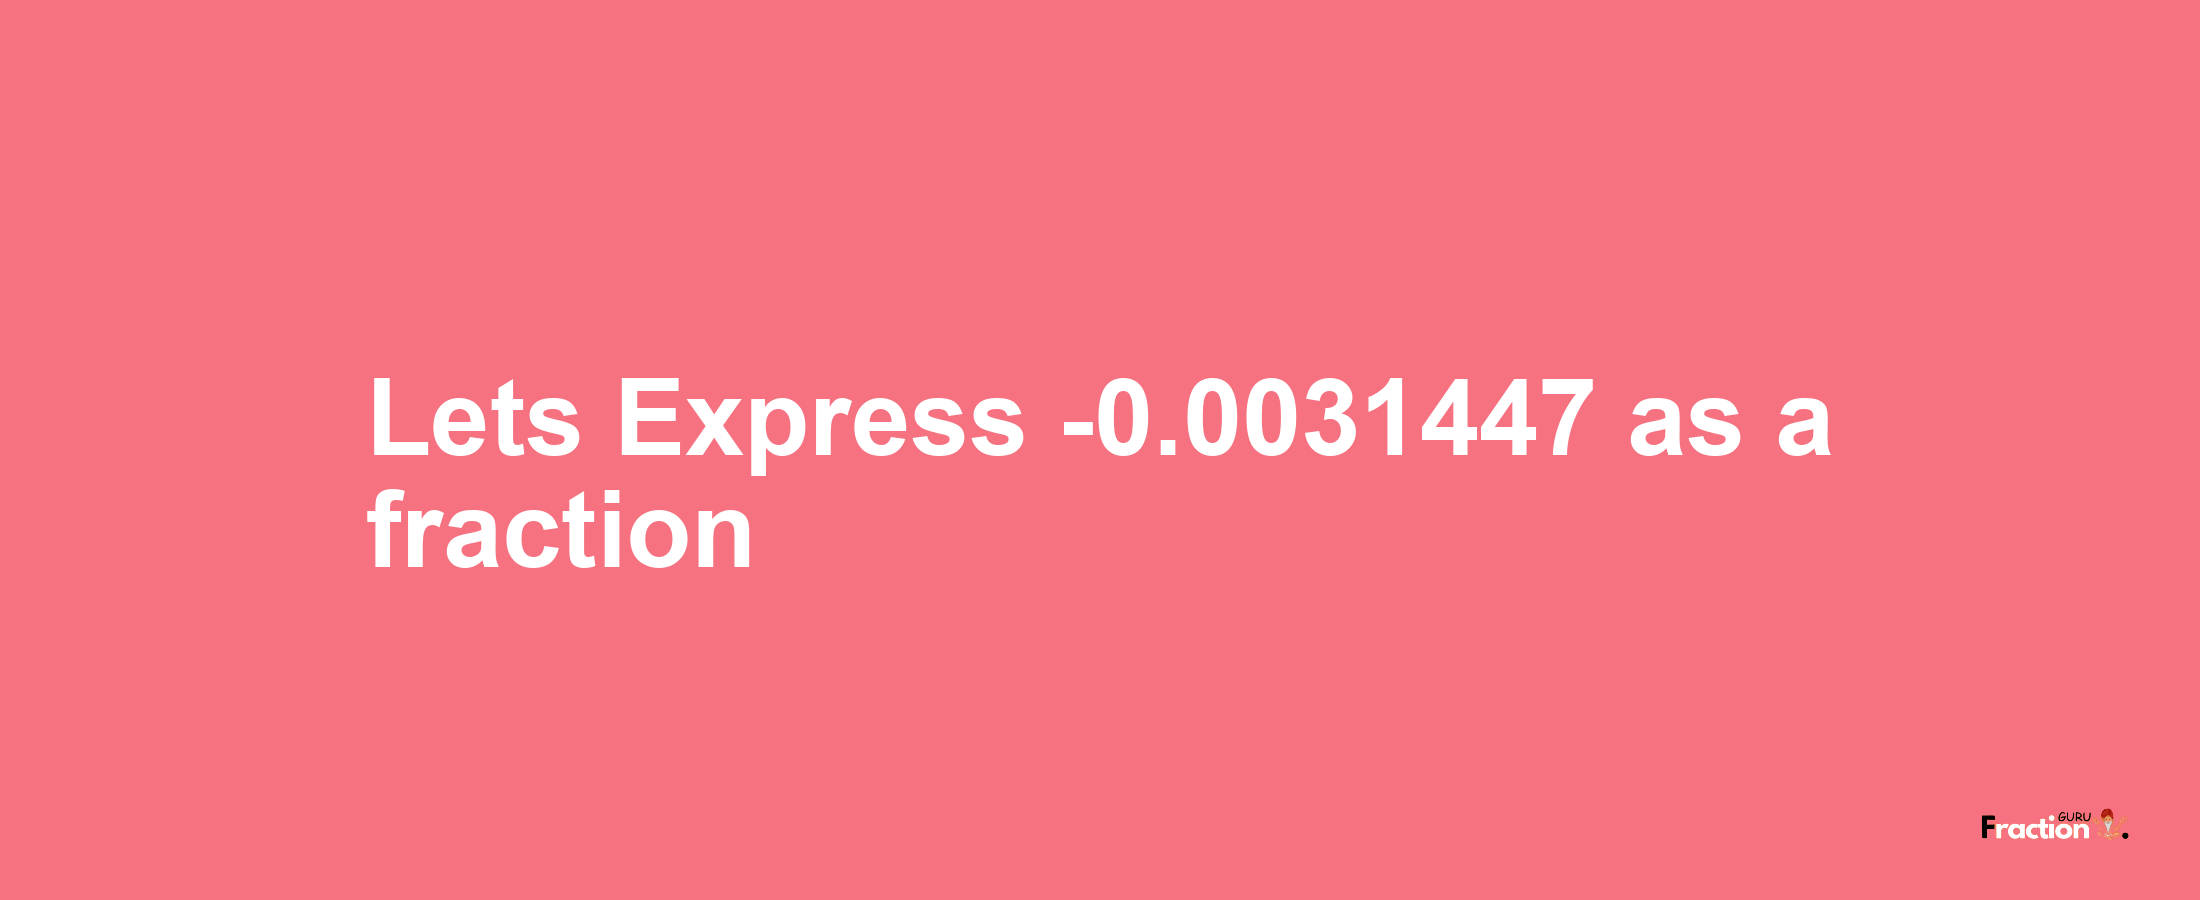 Lets Express -0.0031447 as afraction